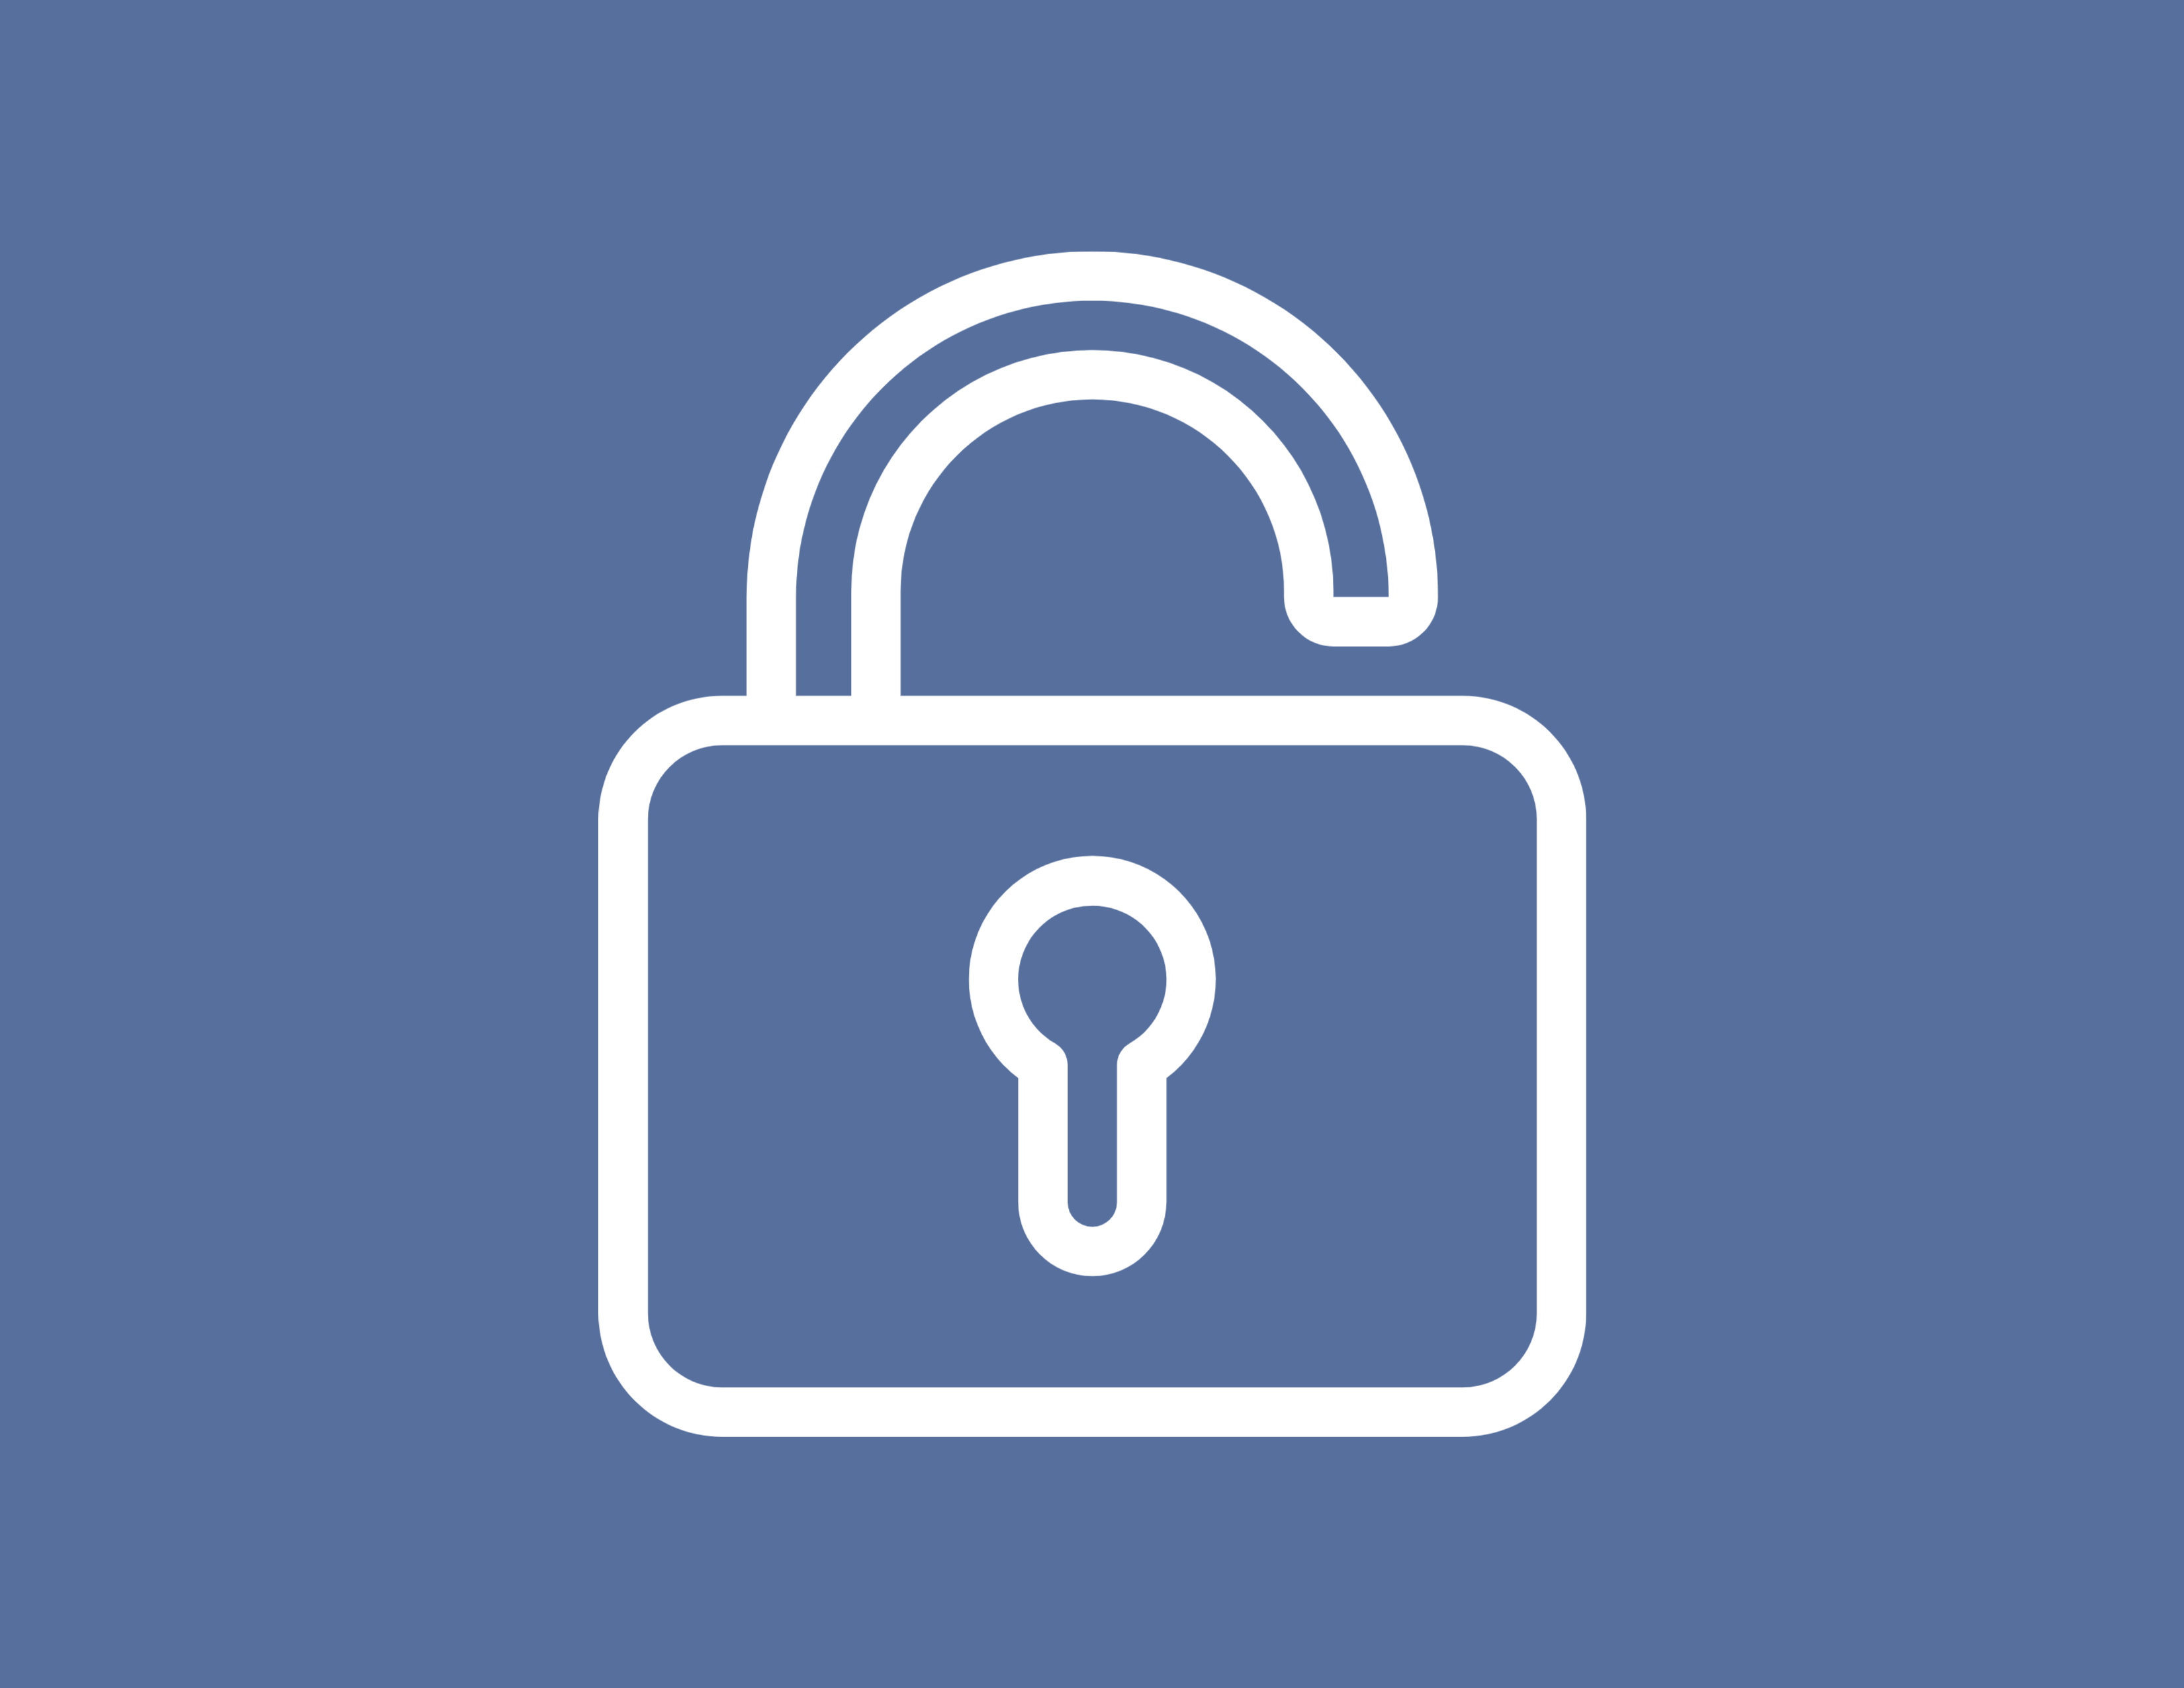 Blue background with unlocked white padlock to symbolize open resources